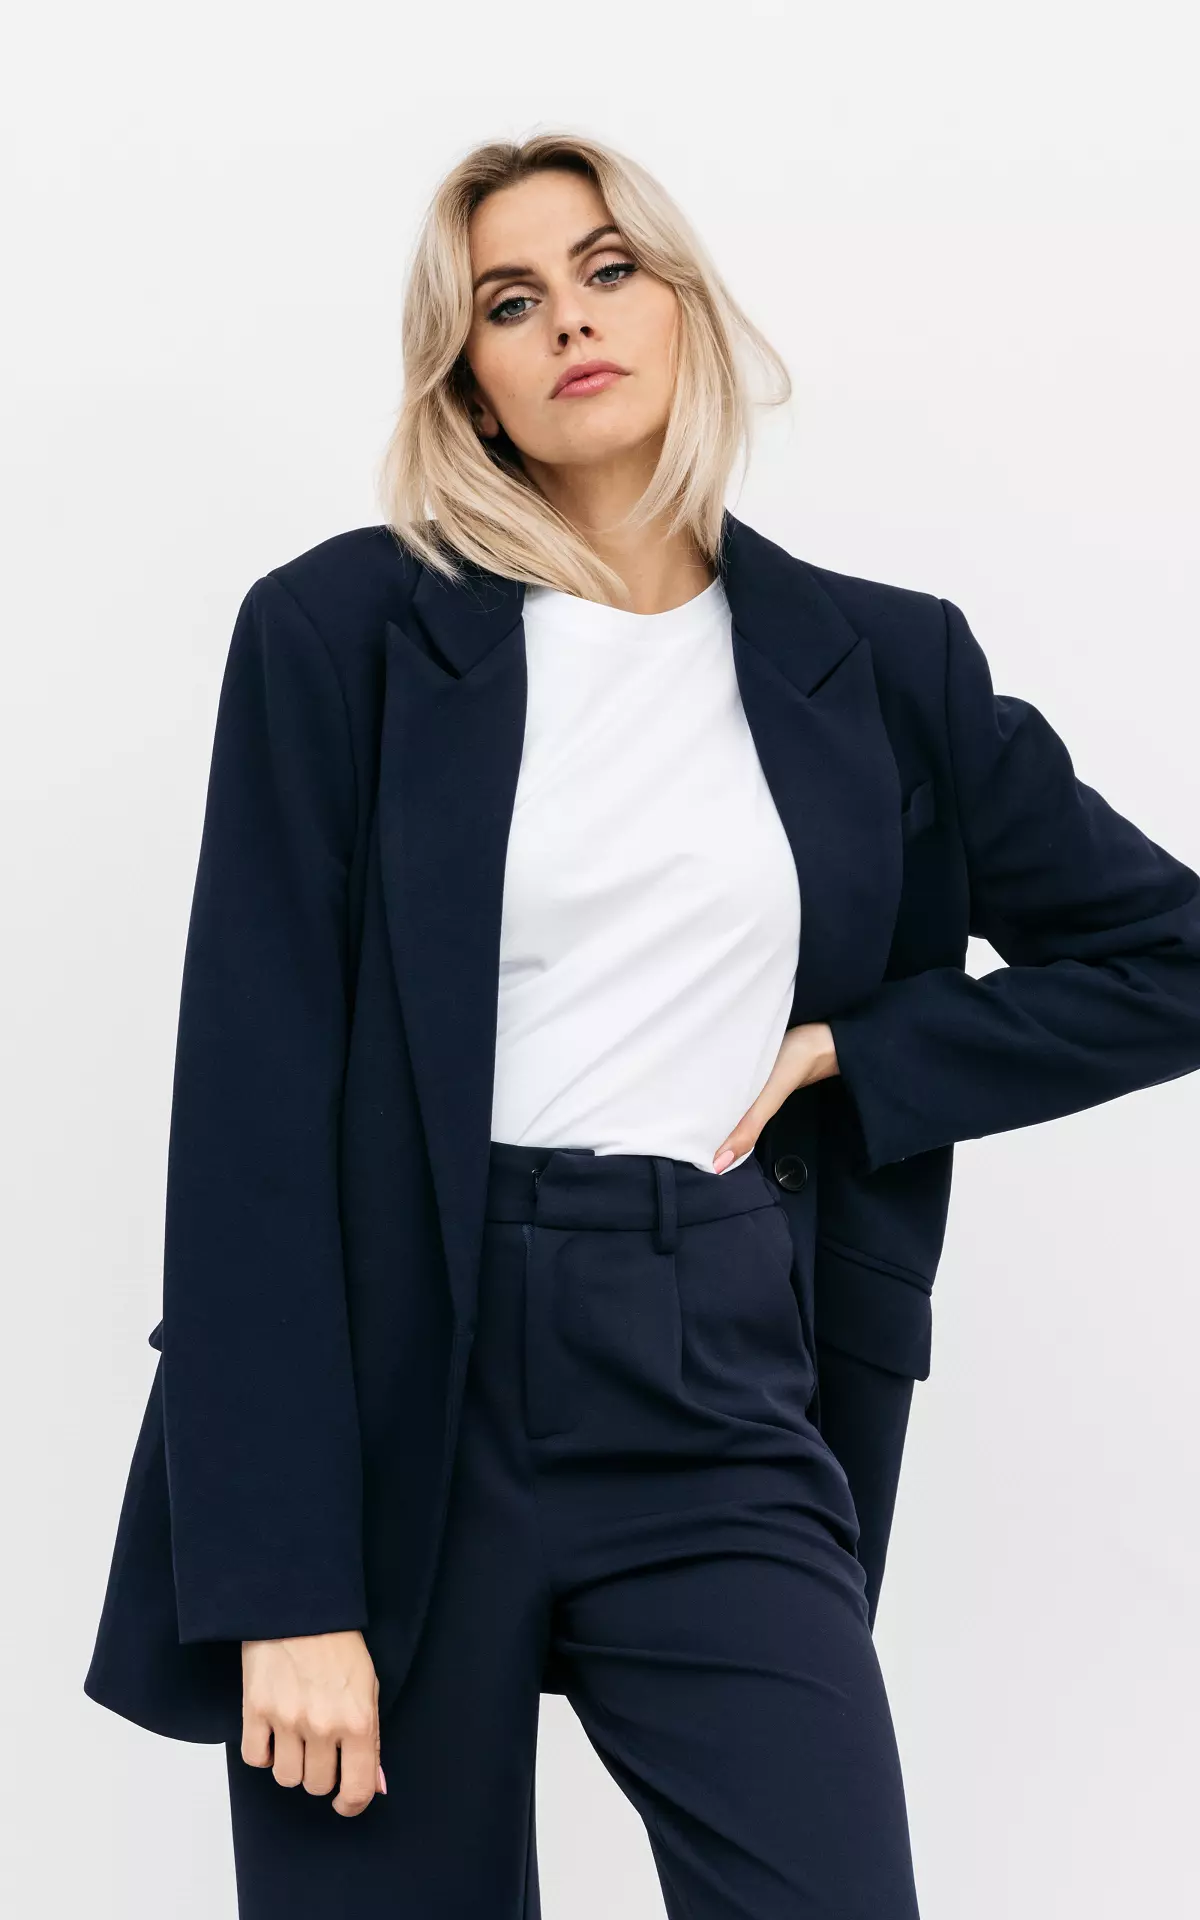 Oversized blazer with shoulder pads | Guts & Gusto